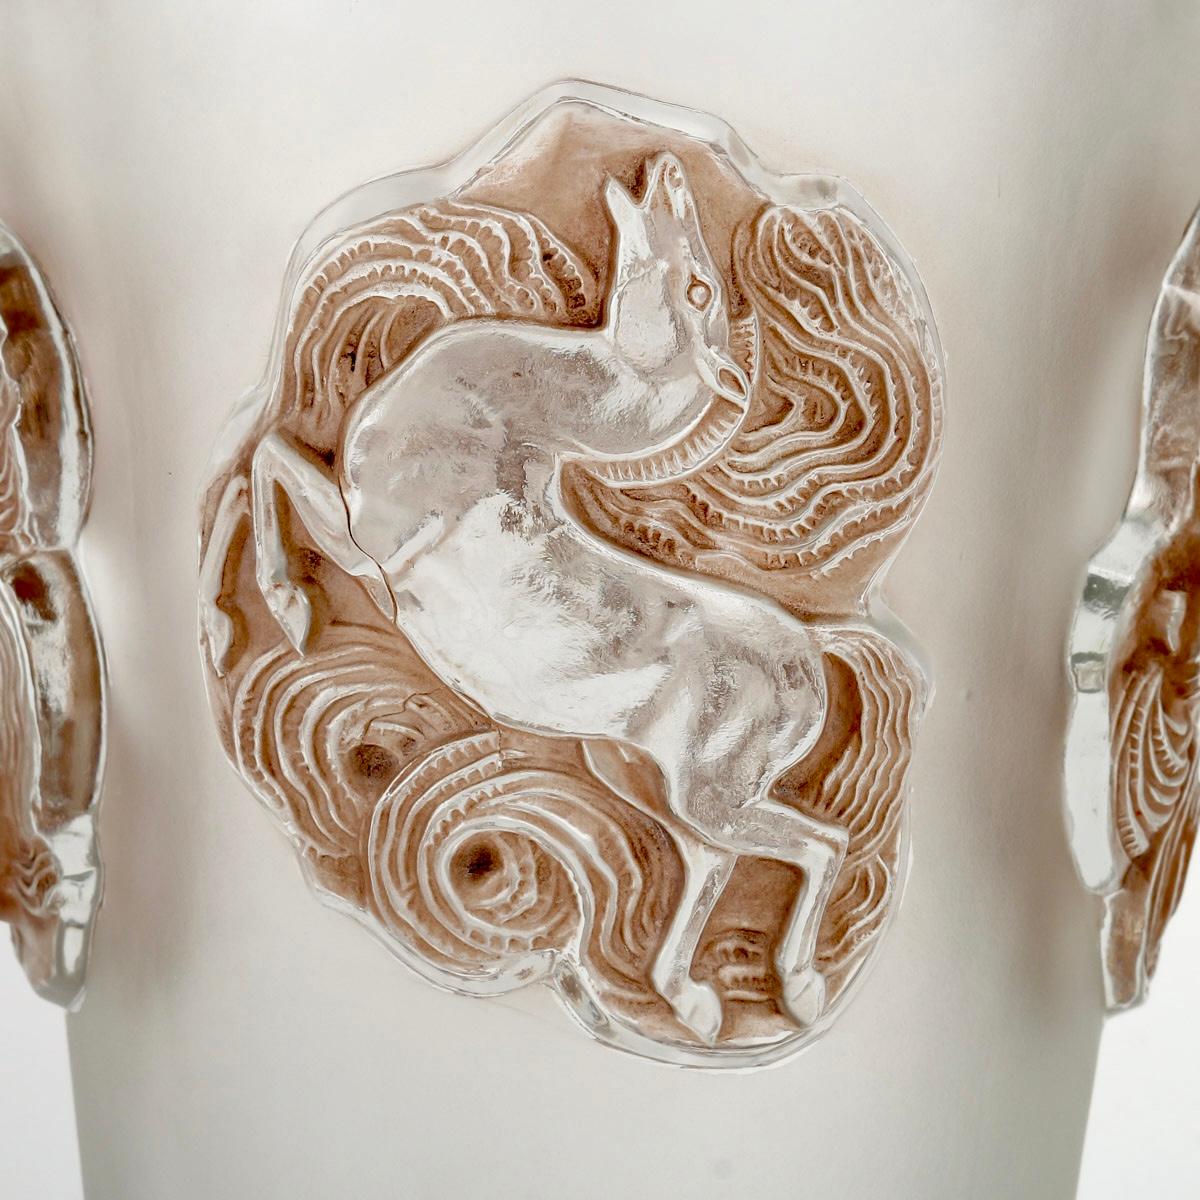 1942 Rene Lalique Vase Camargue Frosted Glass with Sepia Patina In Good Condition For Sale In Boulogne Billancourt, FR